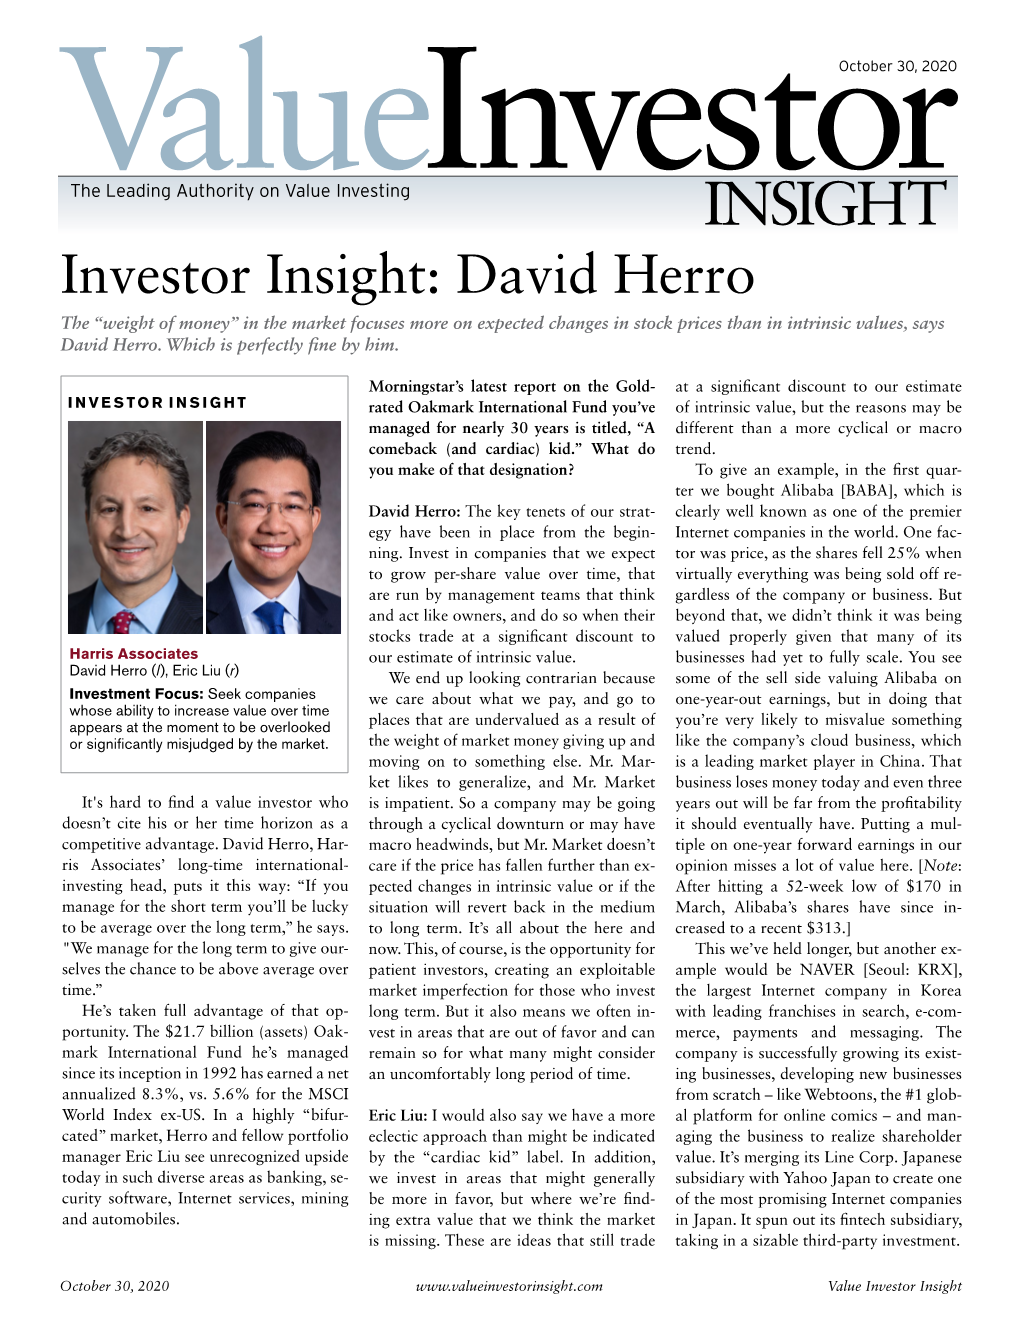 Investor Insight: David Herro the “Weight of Money” in the Market Focuses More on Expected Changes in Stock Prices Than in Intrinsic Values, Says David Herro